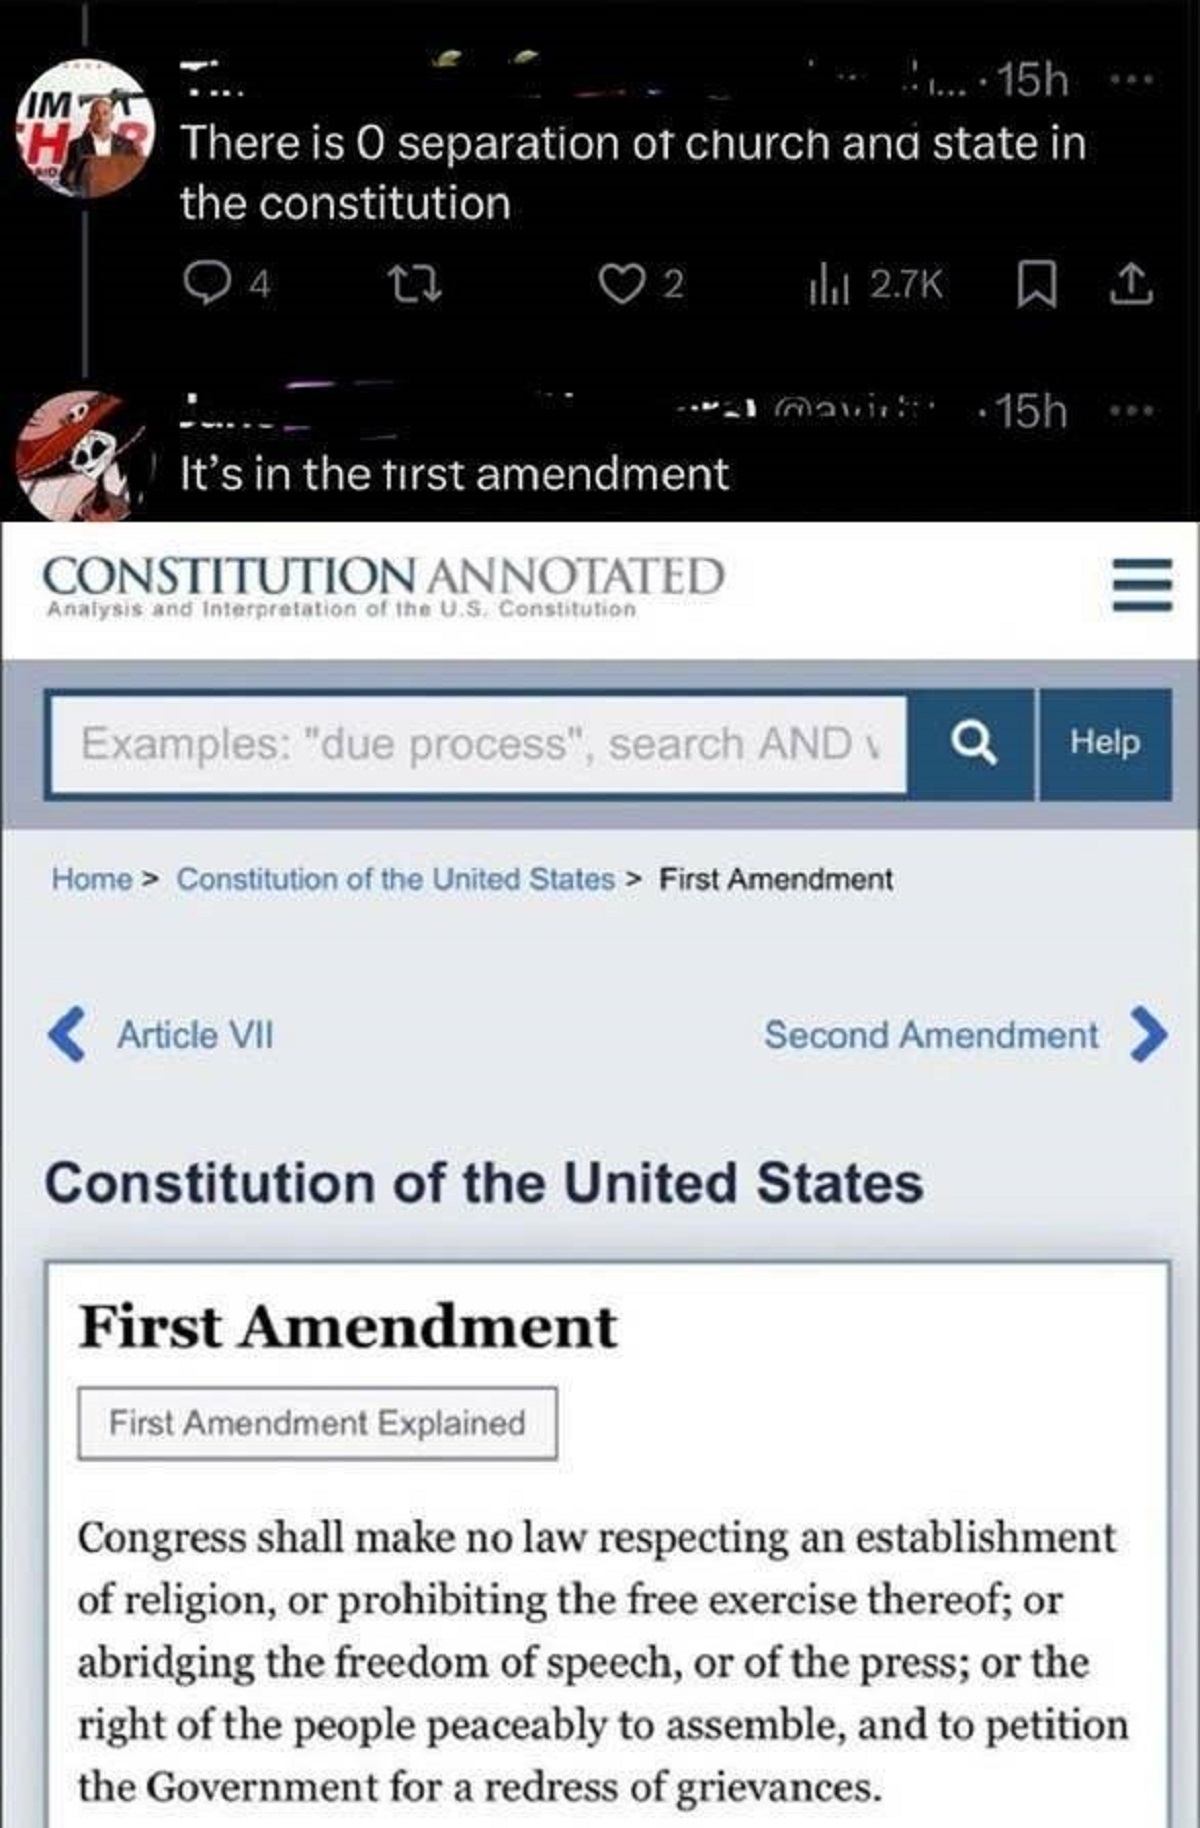 screenshot - Im H Aid ......15h... There is O separation of church and state in the constitution 4 2 lil mavi 15h It's in the first amendment Constitution Annotated Analysis and Interpretation of the U.S. Constitution Examples "due process", search And He